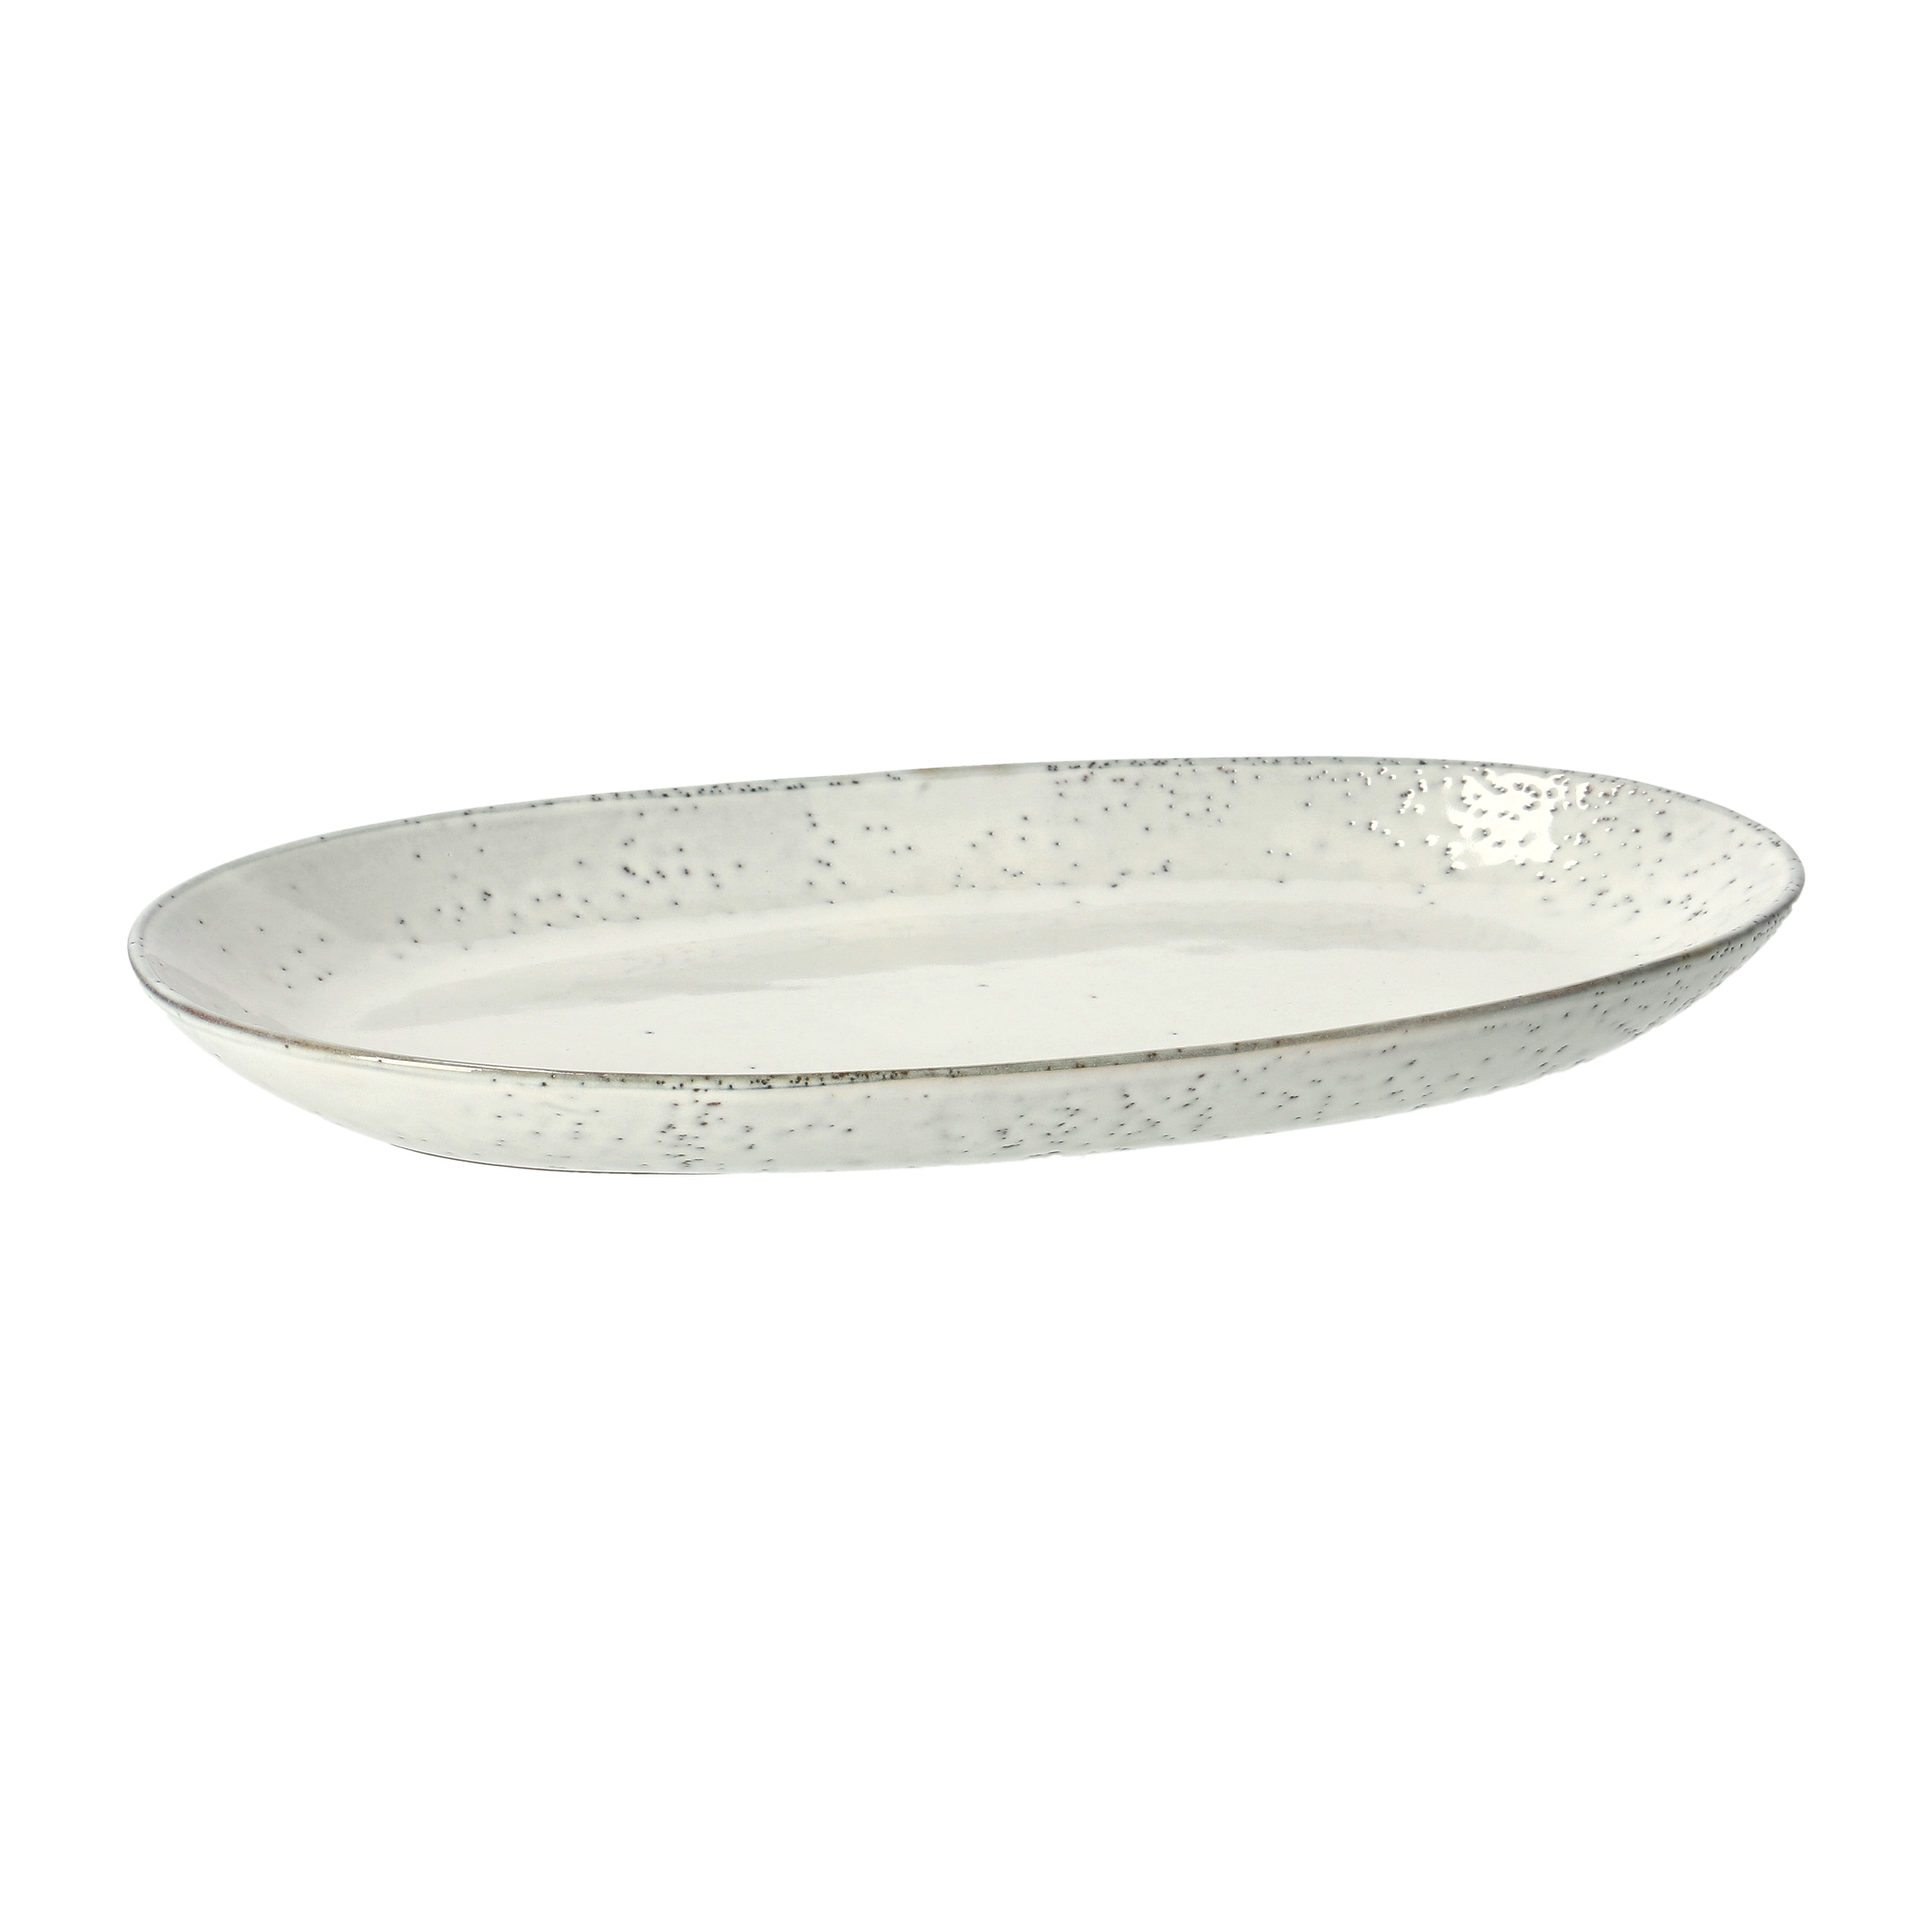 10 x 6-Inch Small Serving Platter by Tezzorio Stainless Steel Oval Platter 